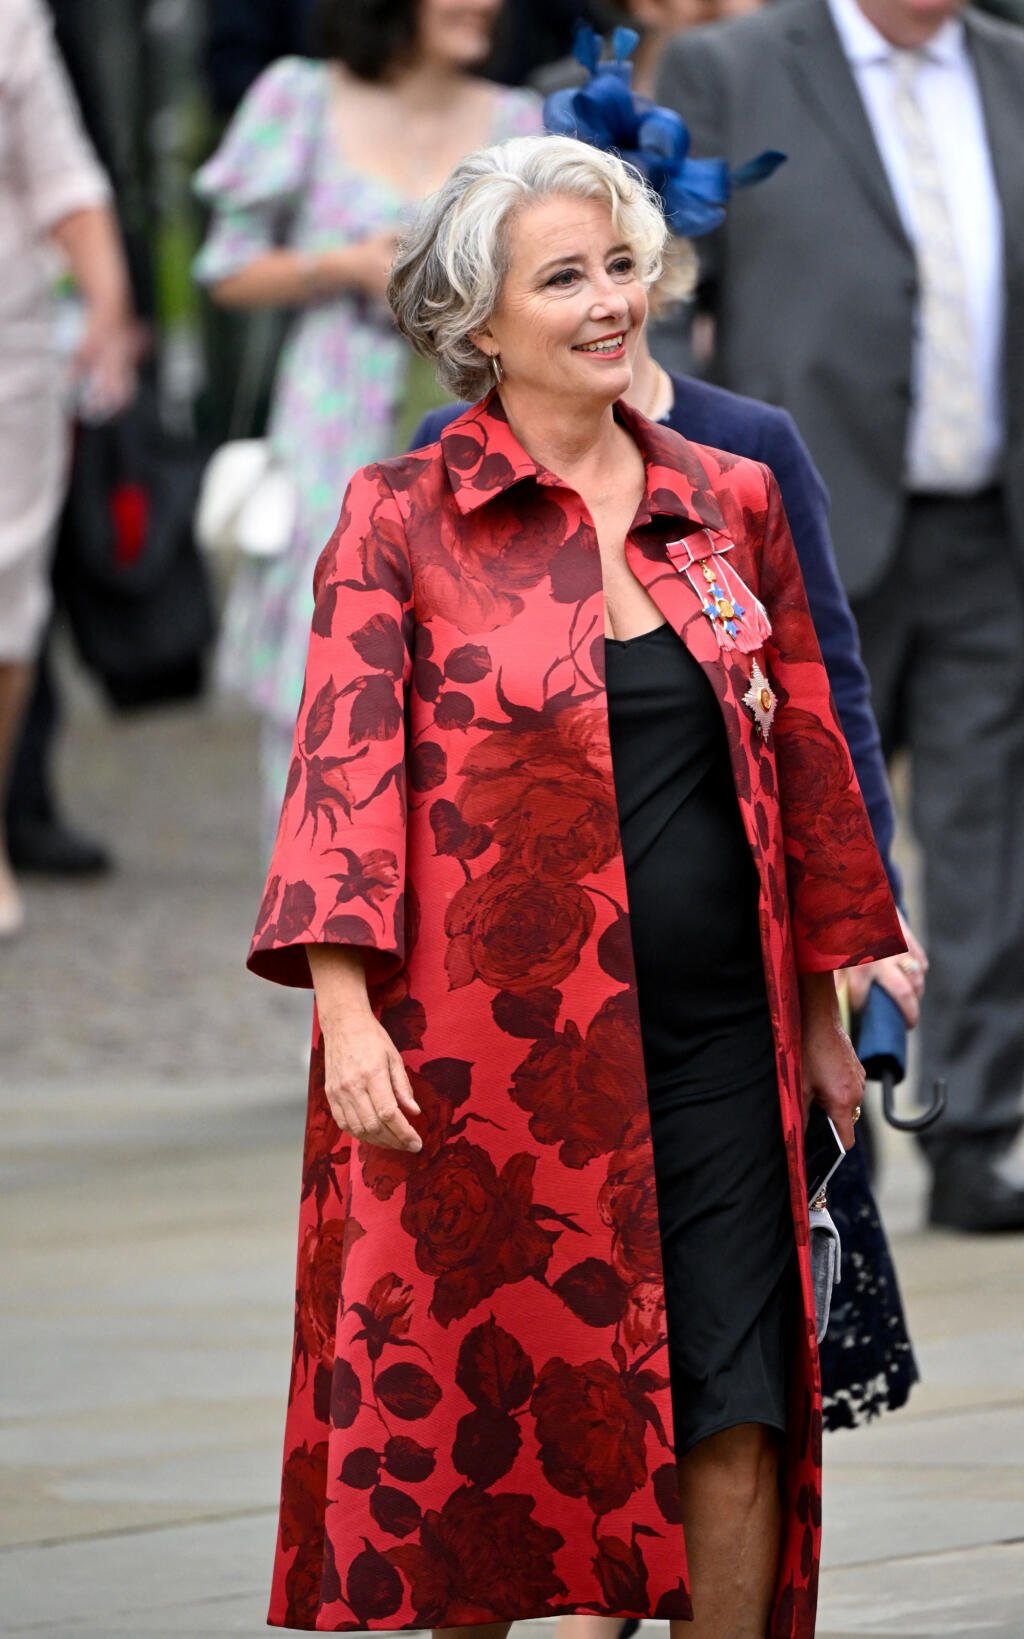 British actress Emma Thompson arrived at the coronation of Charles III.  The entrance to Westminster Abbey is starting to fill up.